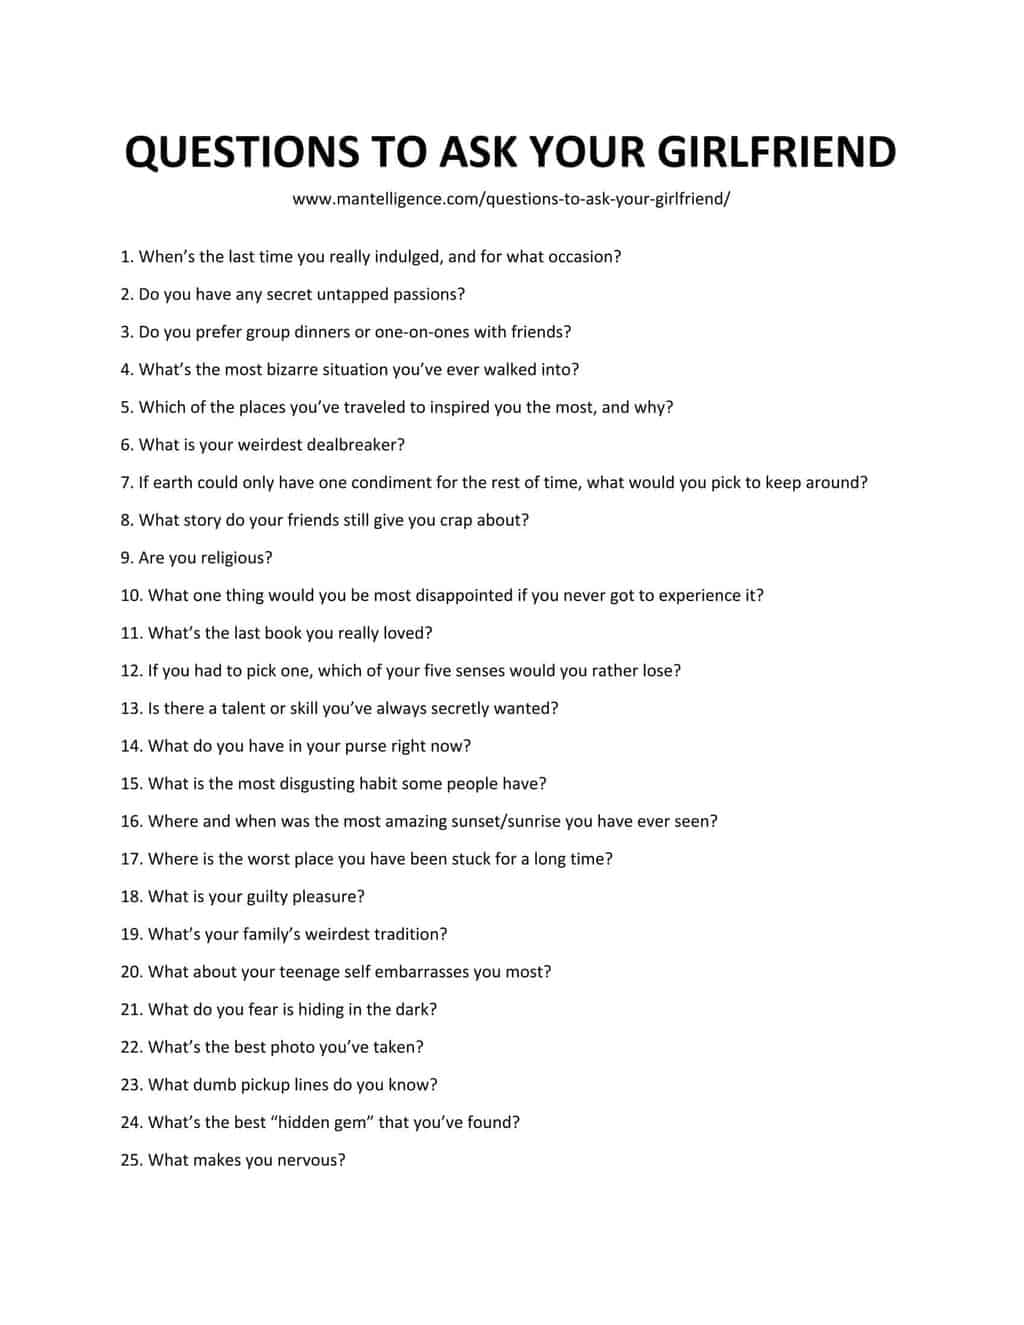 Sexy things to ask your girlfriend